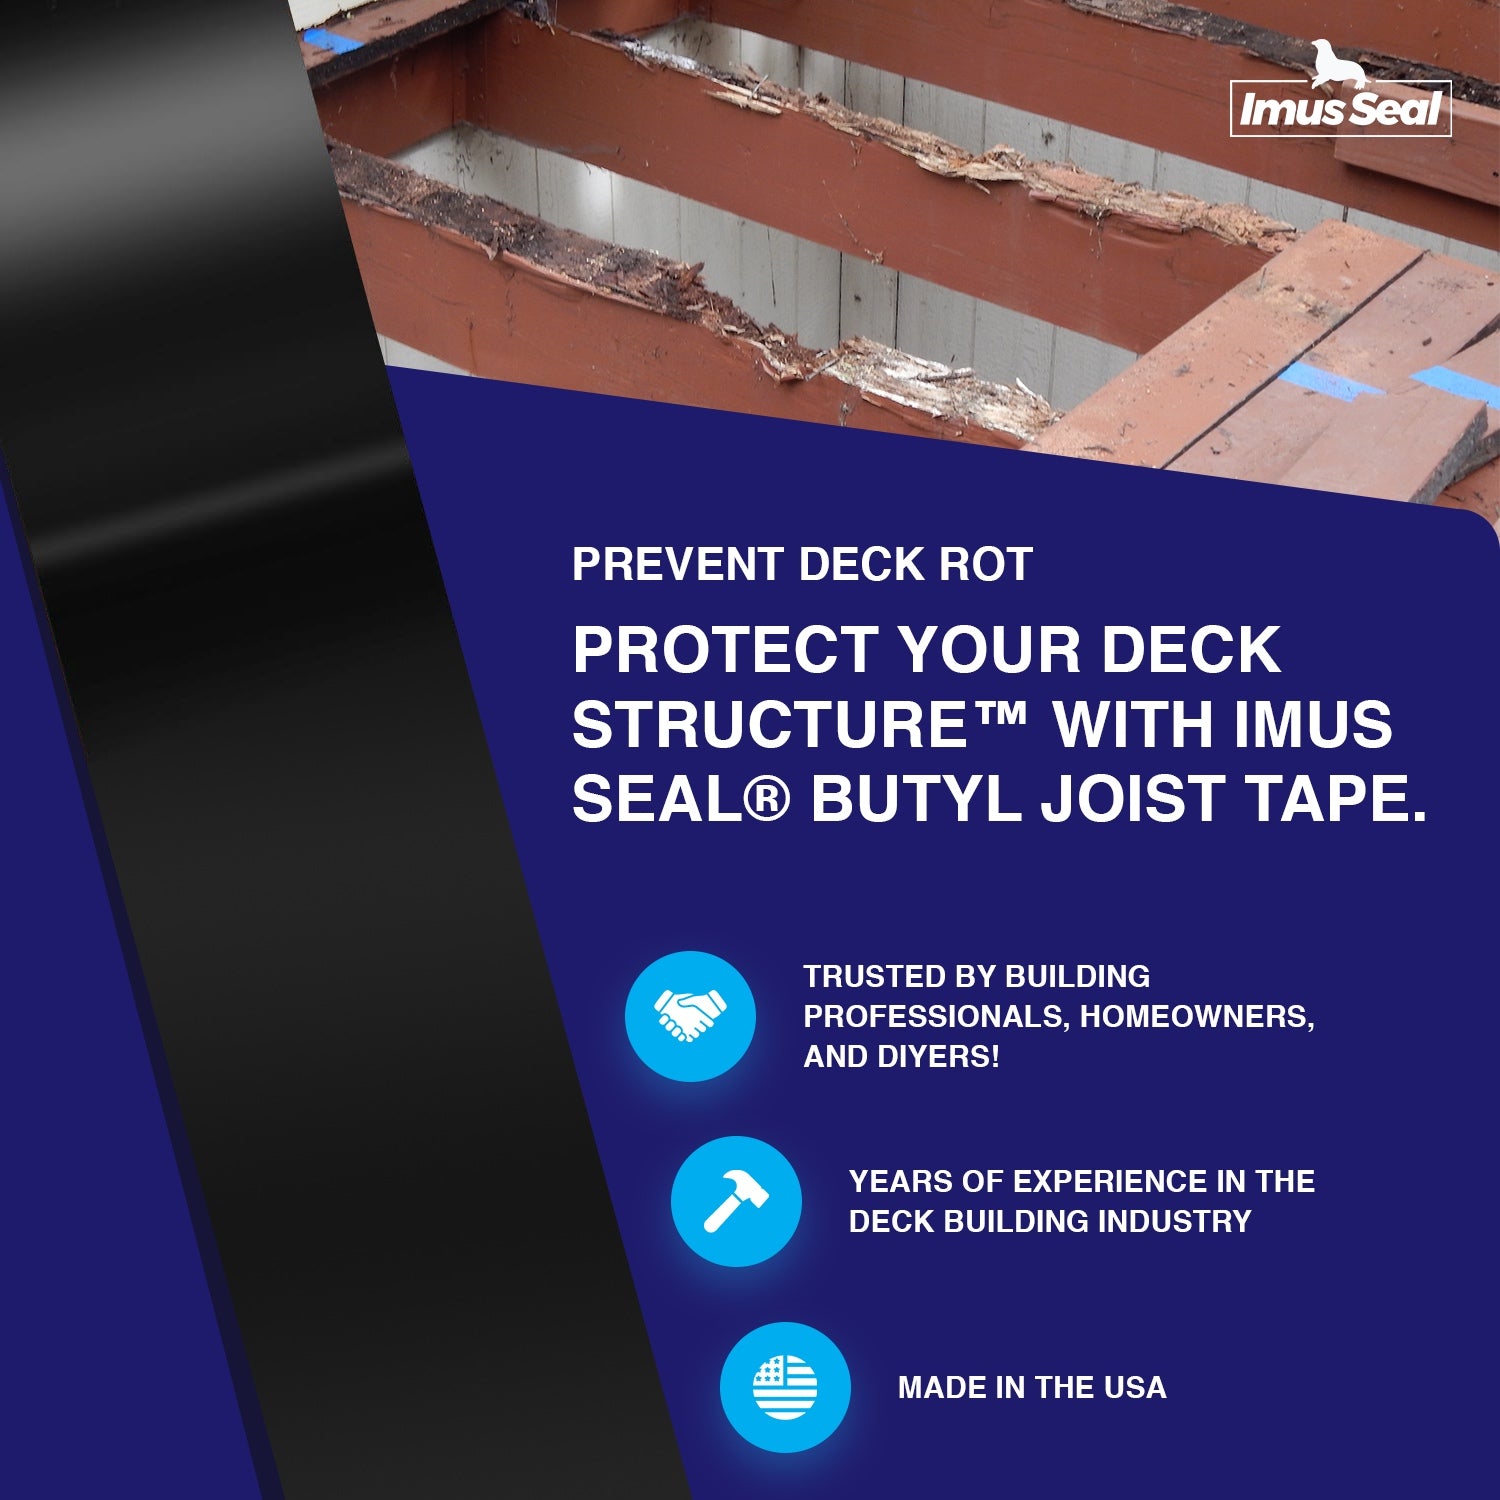 Imus Seal Butyl Joist Tape Non-Skid Prevent Deck Rot Infographic